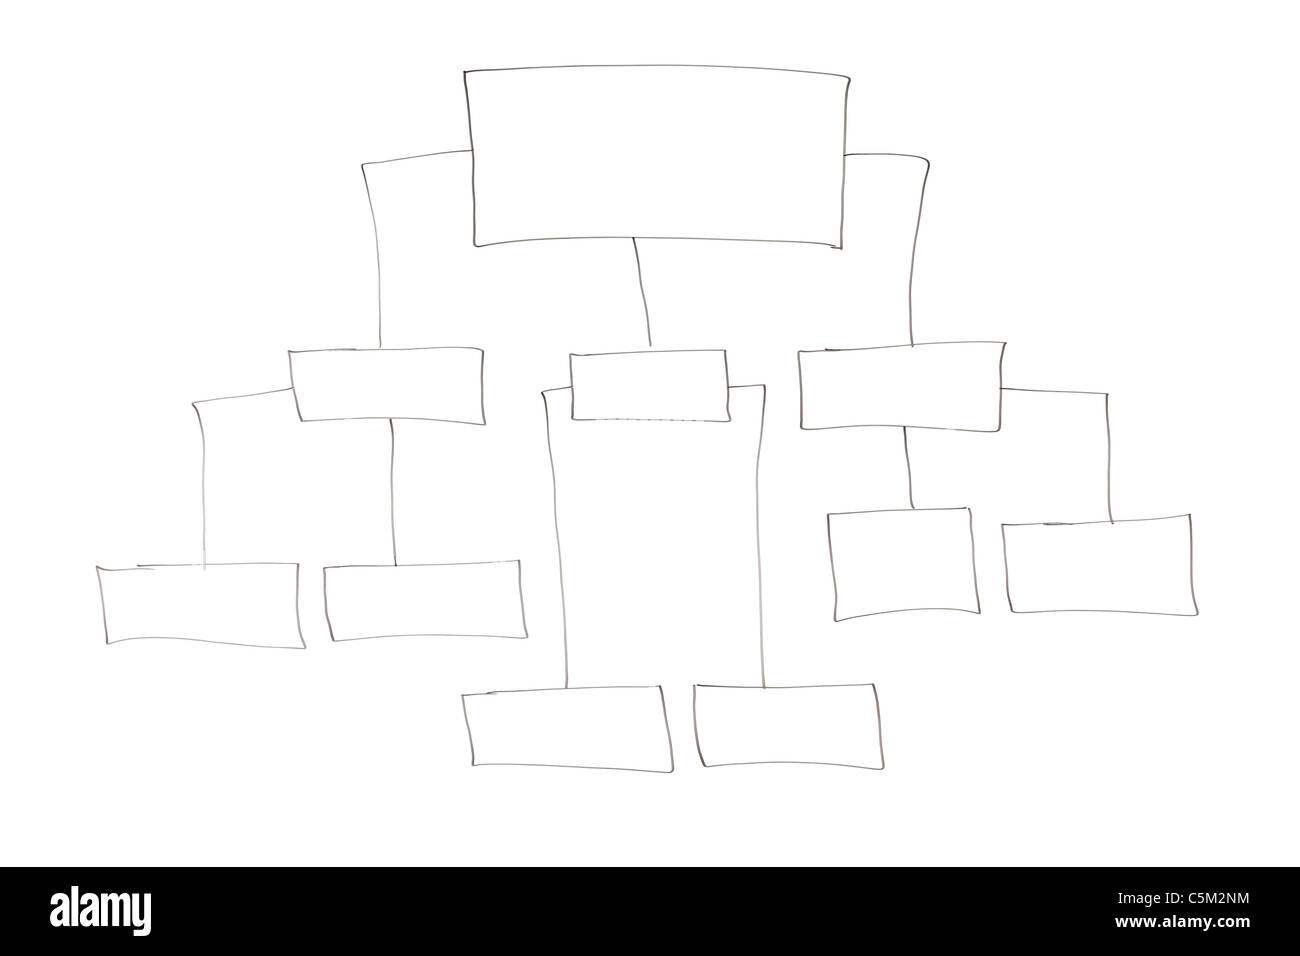 Blank diagram of  hierarchy Stock Photo